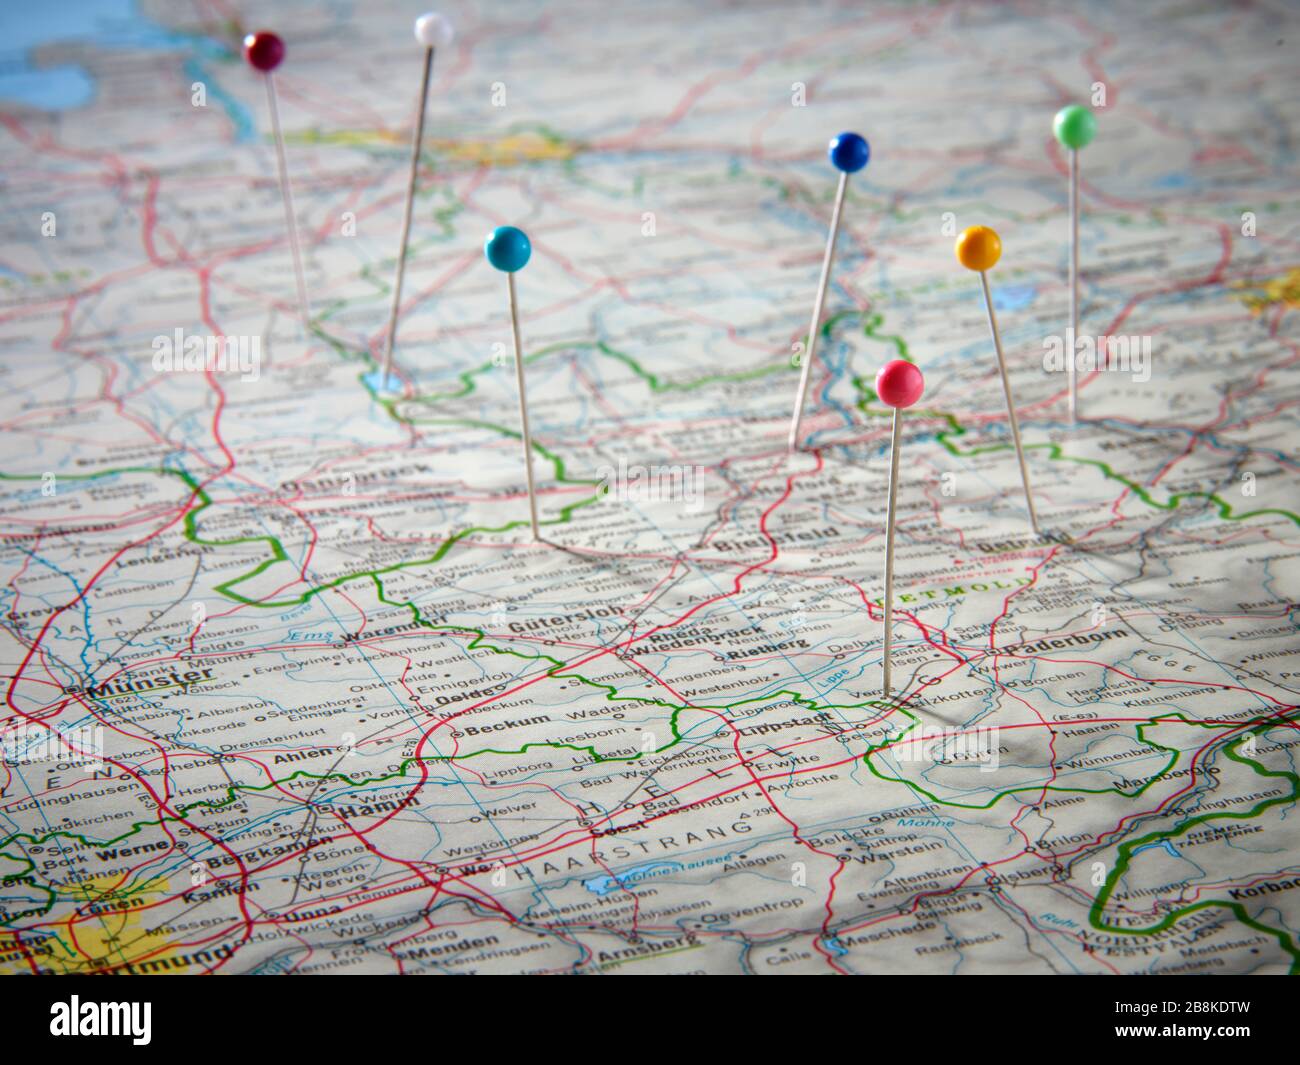 Pins on map marking locations Stock Photo